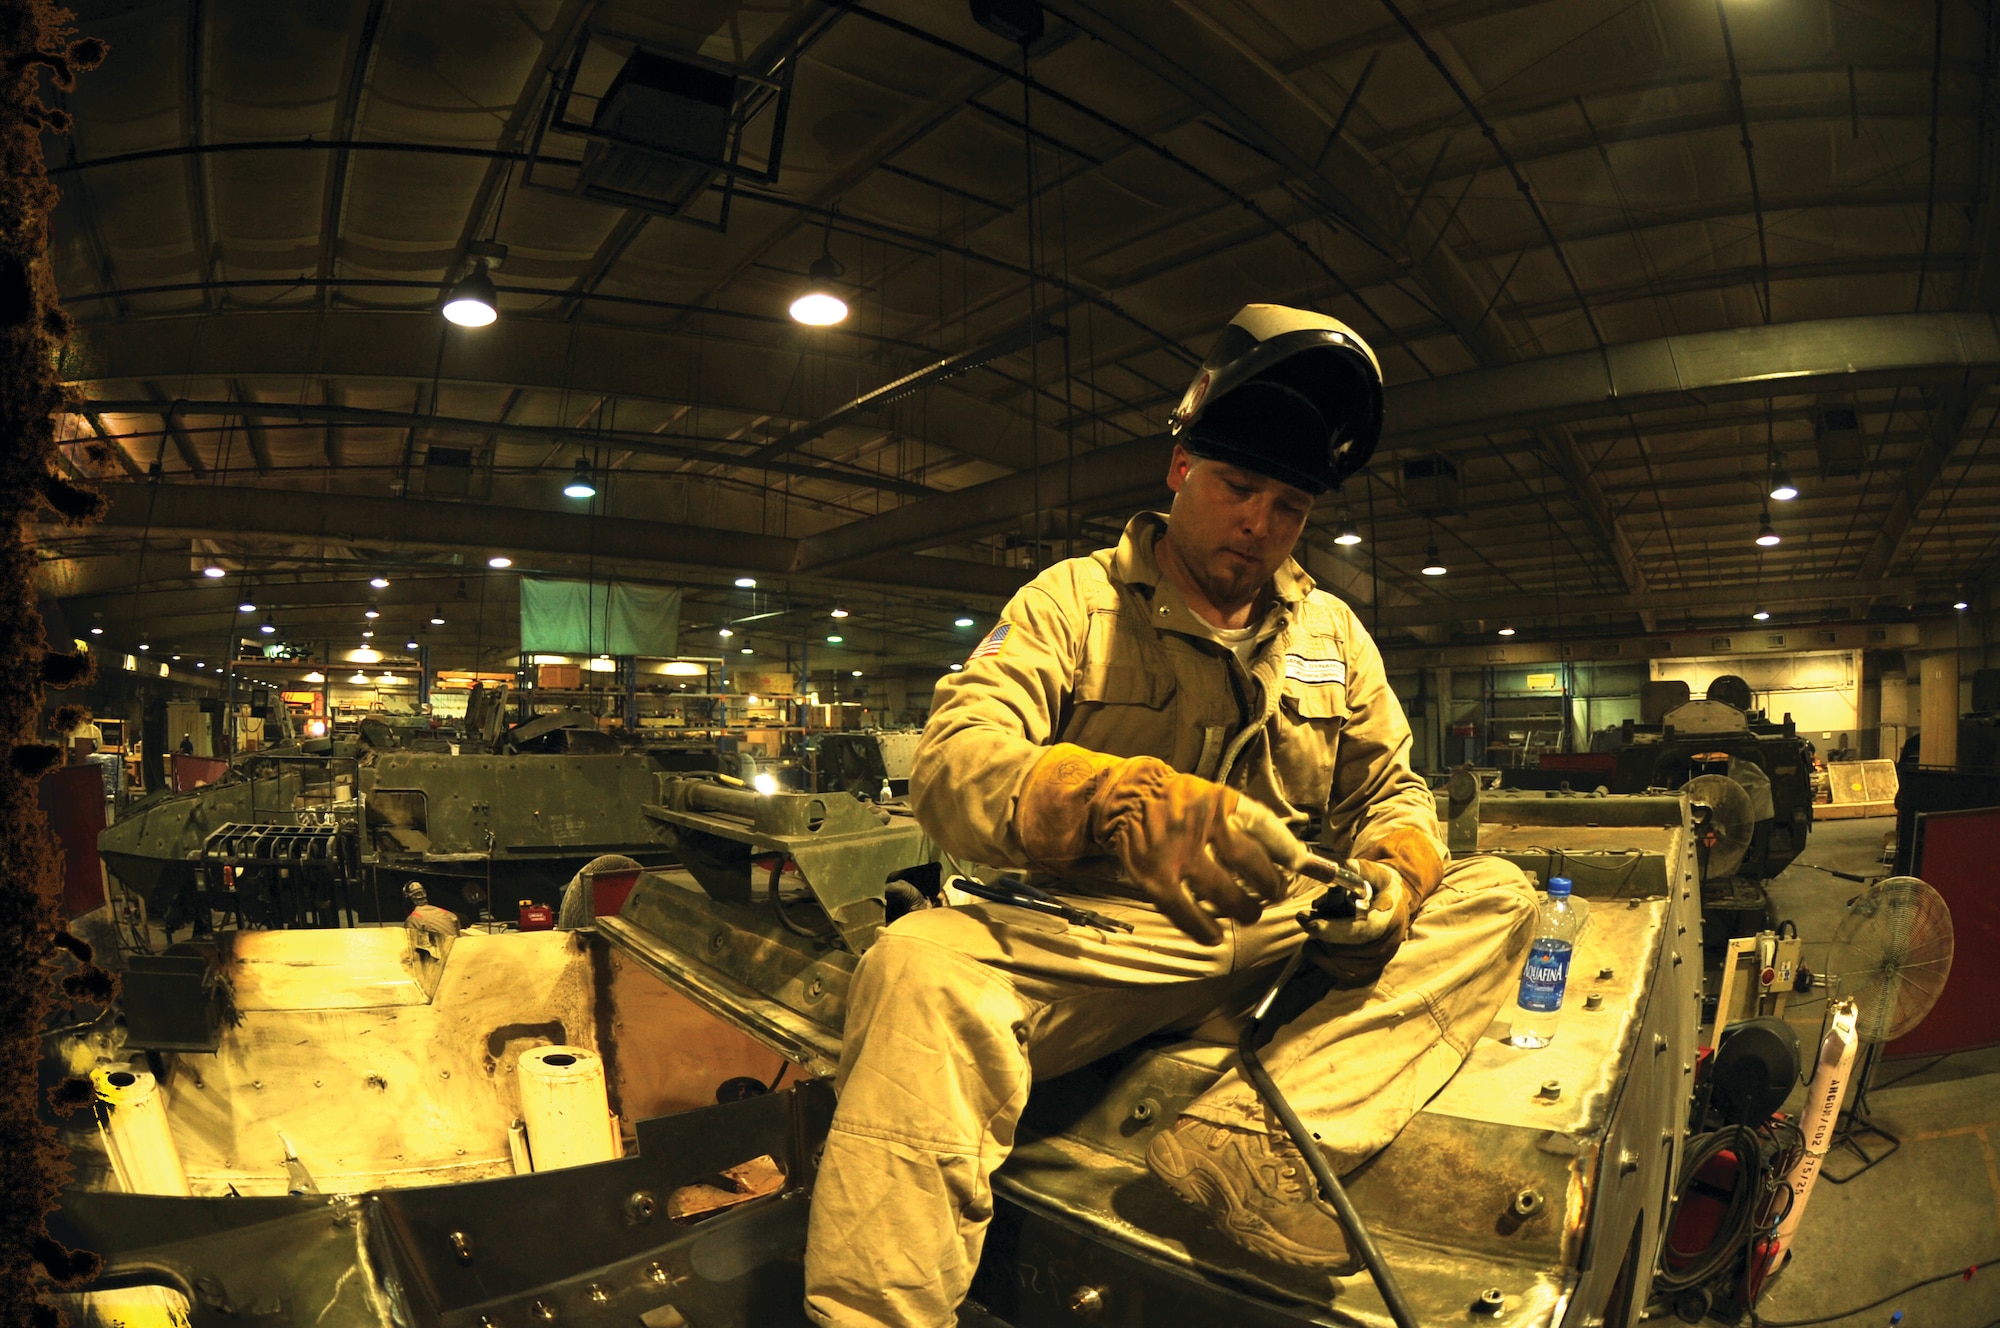 Jason Hill, a senior welder at General Dynamics Land Systems Battle Damage Repair Facility at Camp As Saylayah in Southwest Asia, works on welding a damaged Stryker recently. The welders at the BDRF complete all welding by hand to rebuild battle-damaged Strykers for return to the battlefield.(U.S. Air Force photo/Staff Sgt. Tim Jenkins)